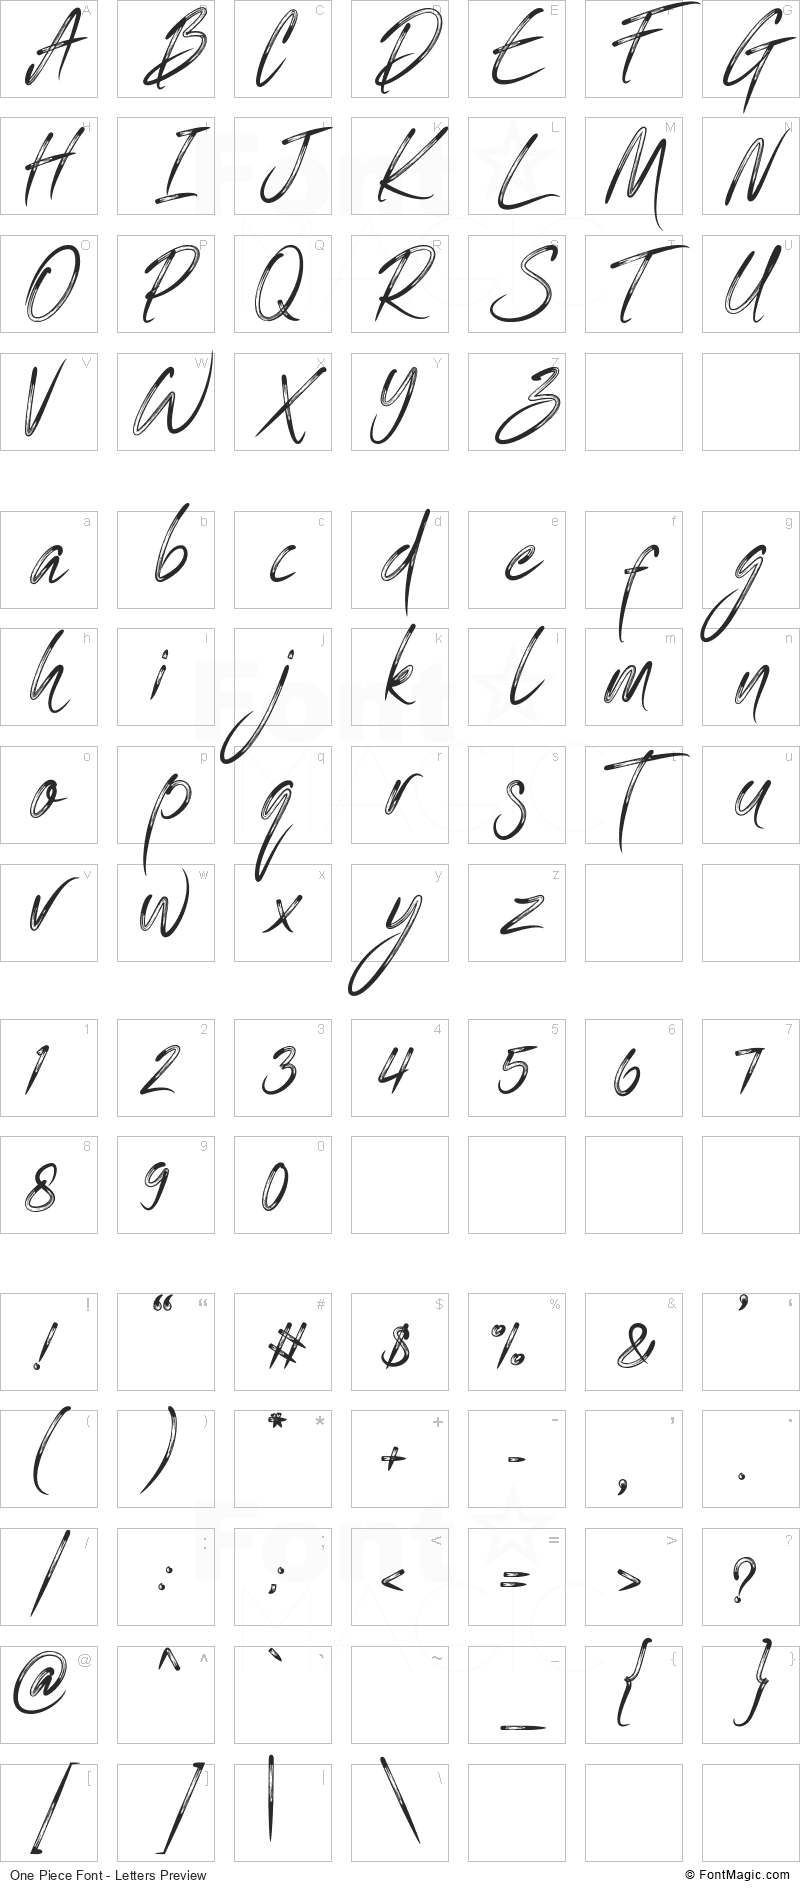 One Piece Font - All Latters Preview Chart